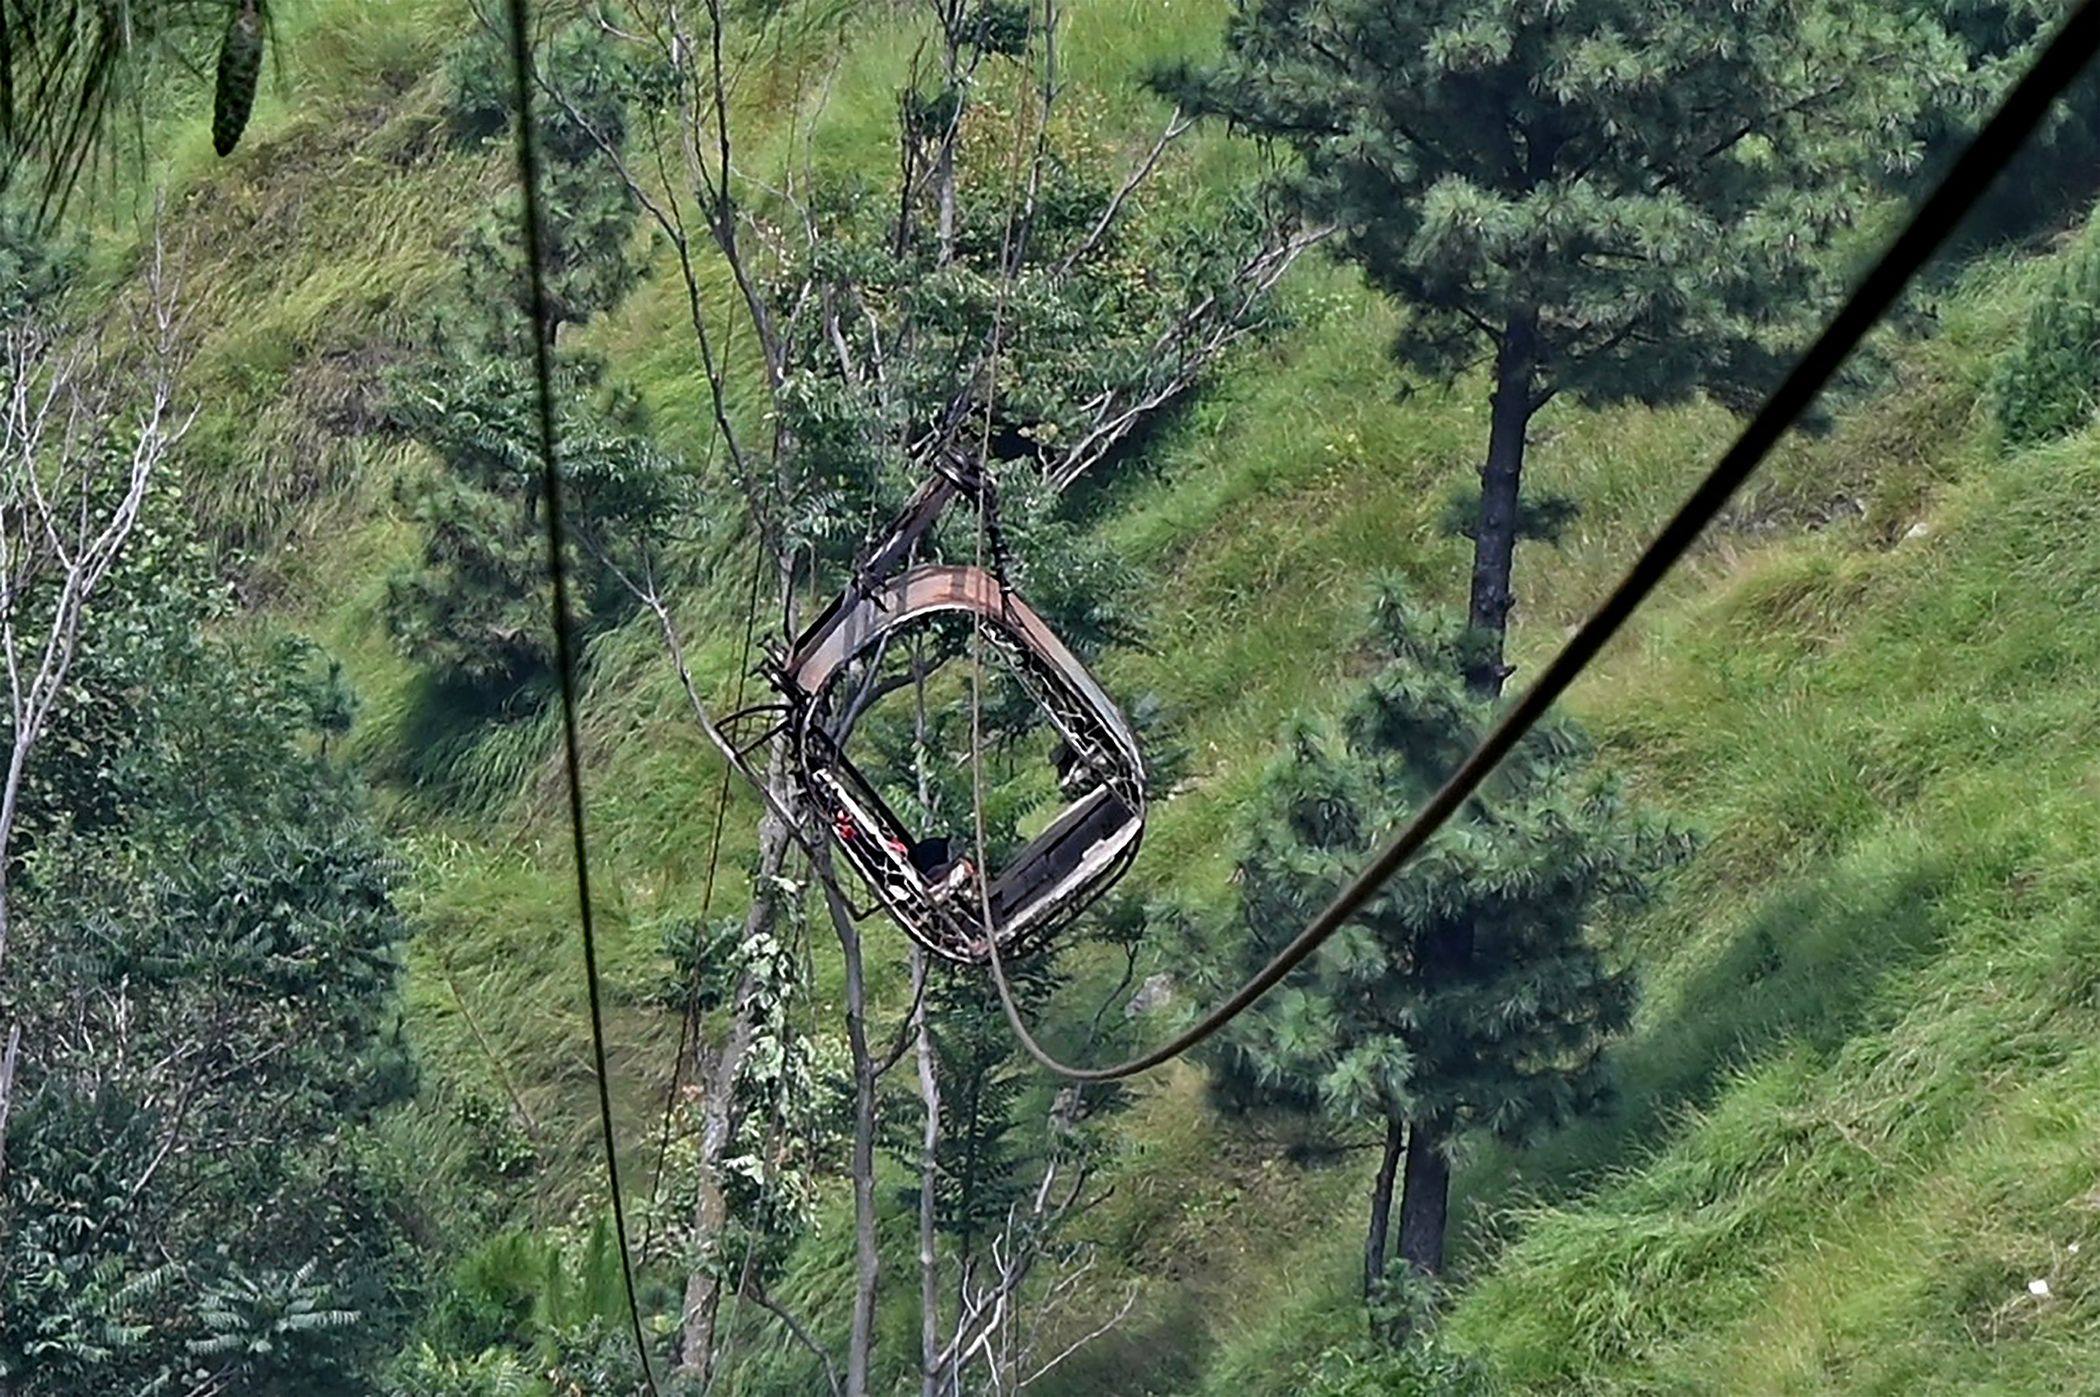 A view of the chairlift cable car in the Pashto village of Khyber Pakhtunkhwa province, Pakistan on Wednesday, a day after it broke sending passengers plunging into a ravine. Photo: AFP